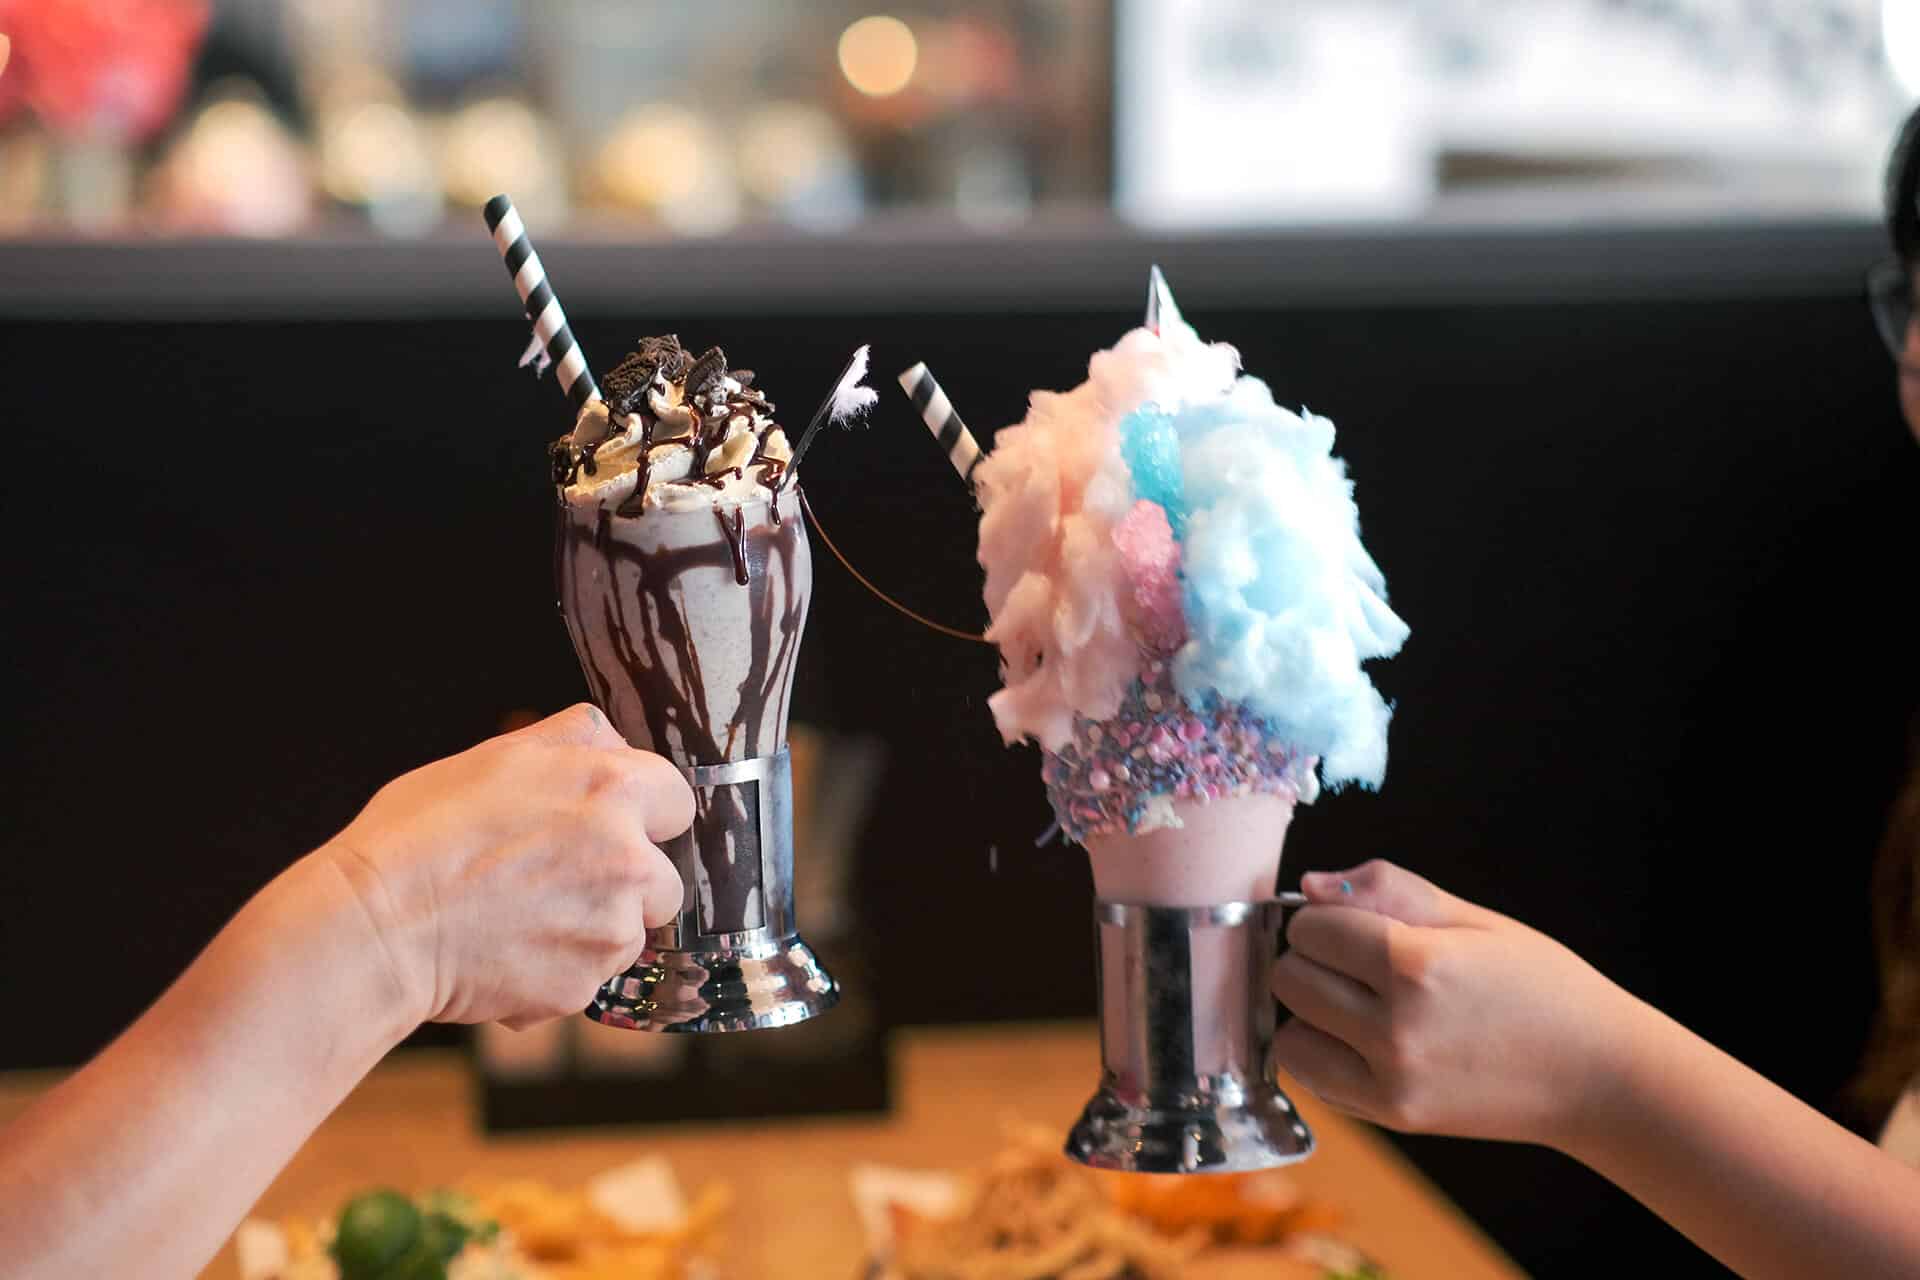 Sweeten up the occasion with these shakes from Black Tap Craft Burgers & Shakes.